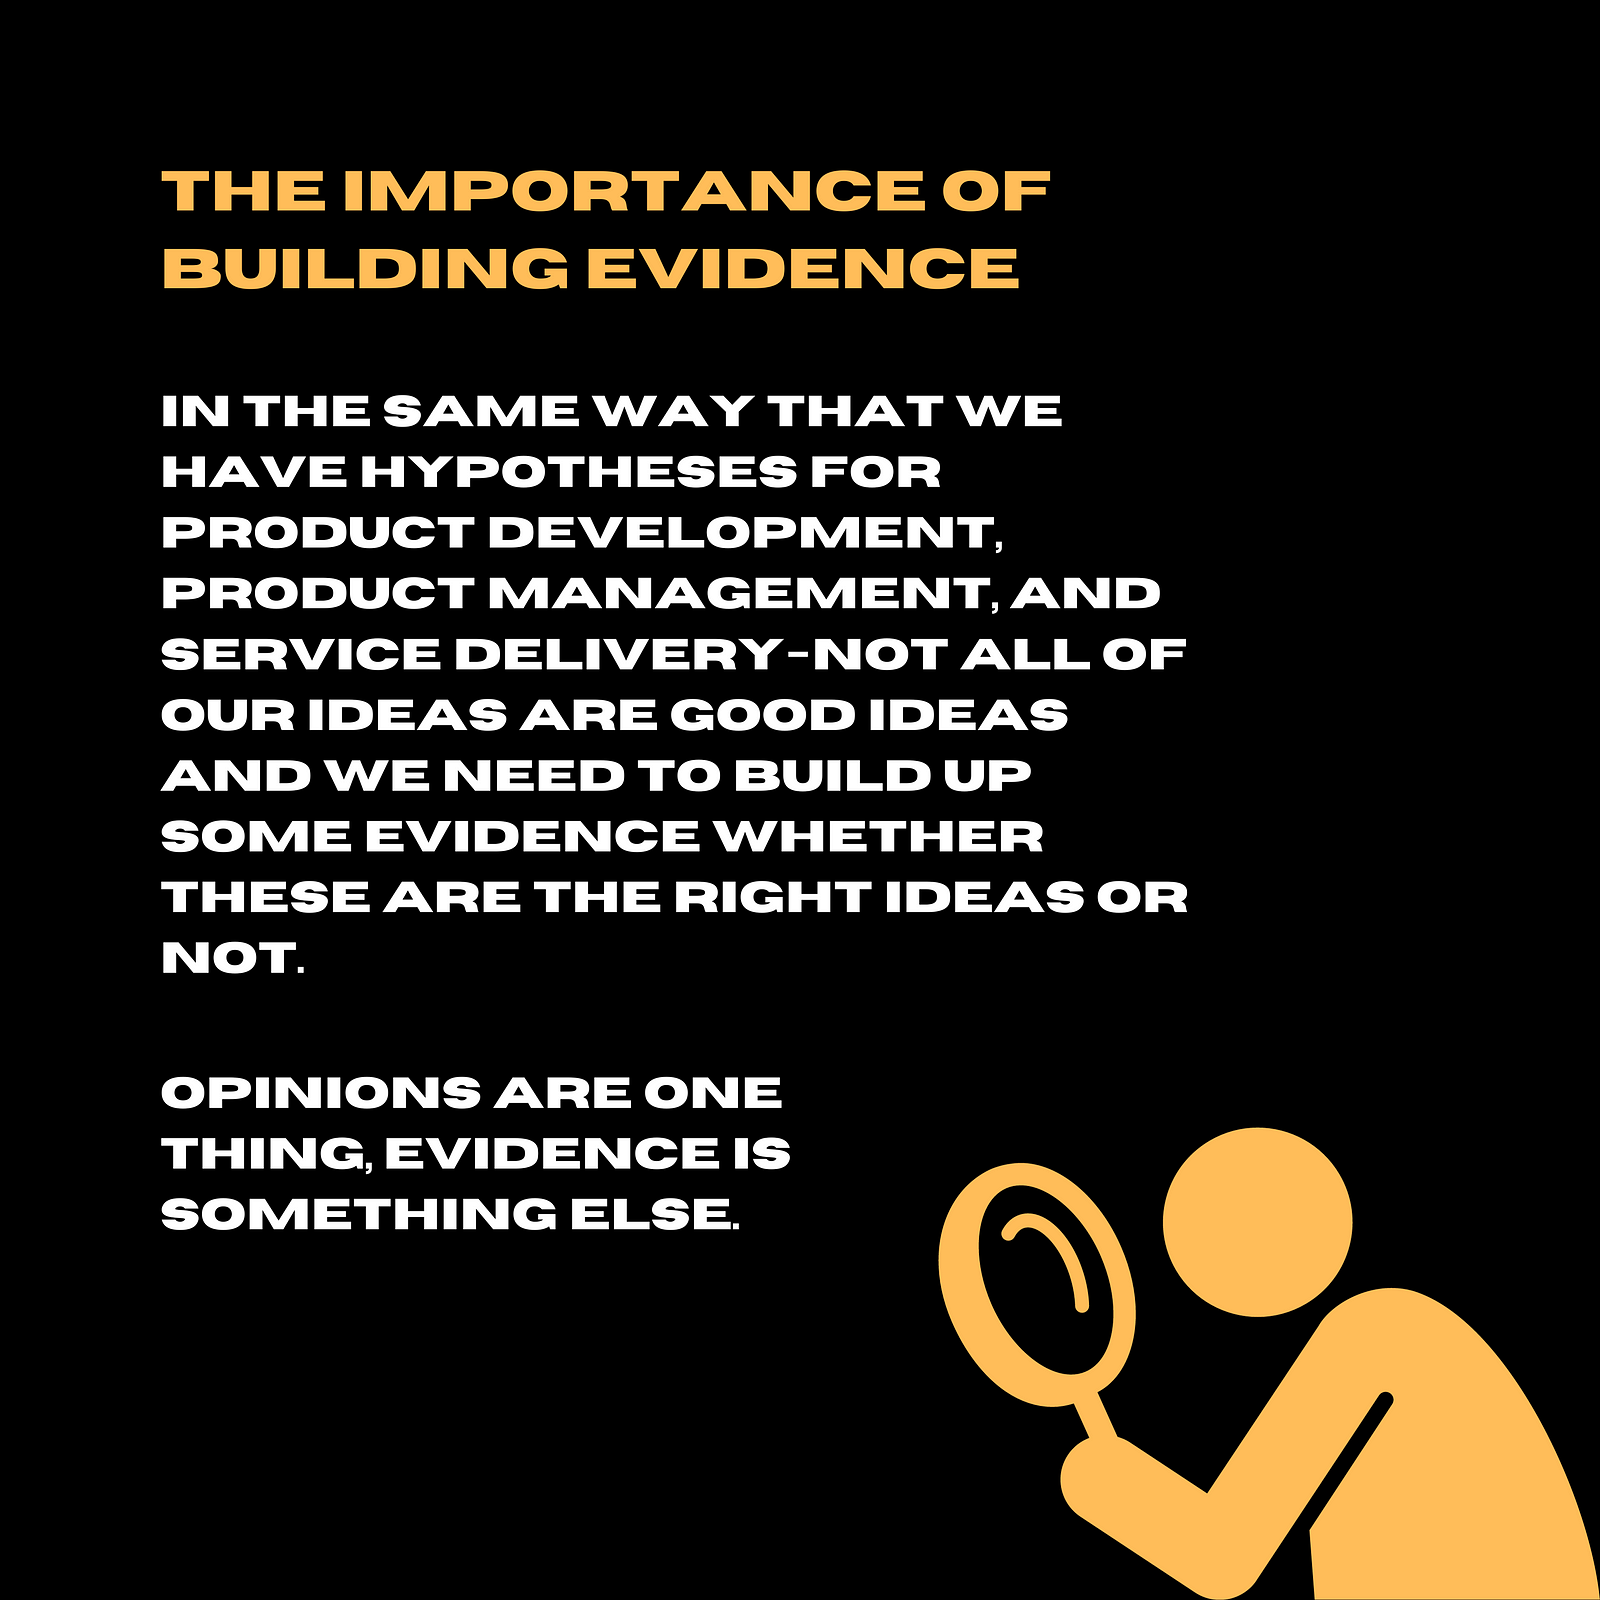  in the same way that we have hypotheses for product development, product management, and service delivery — not all of our ideas are good ideas and we need to build up some evidence whether these are the right ideas or not.